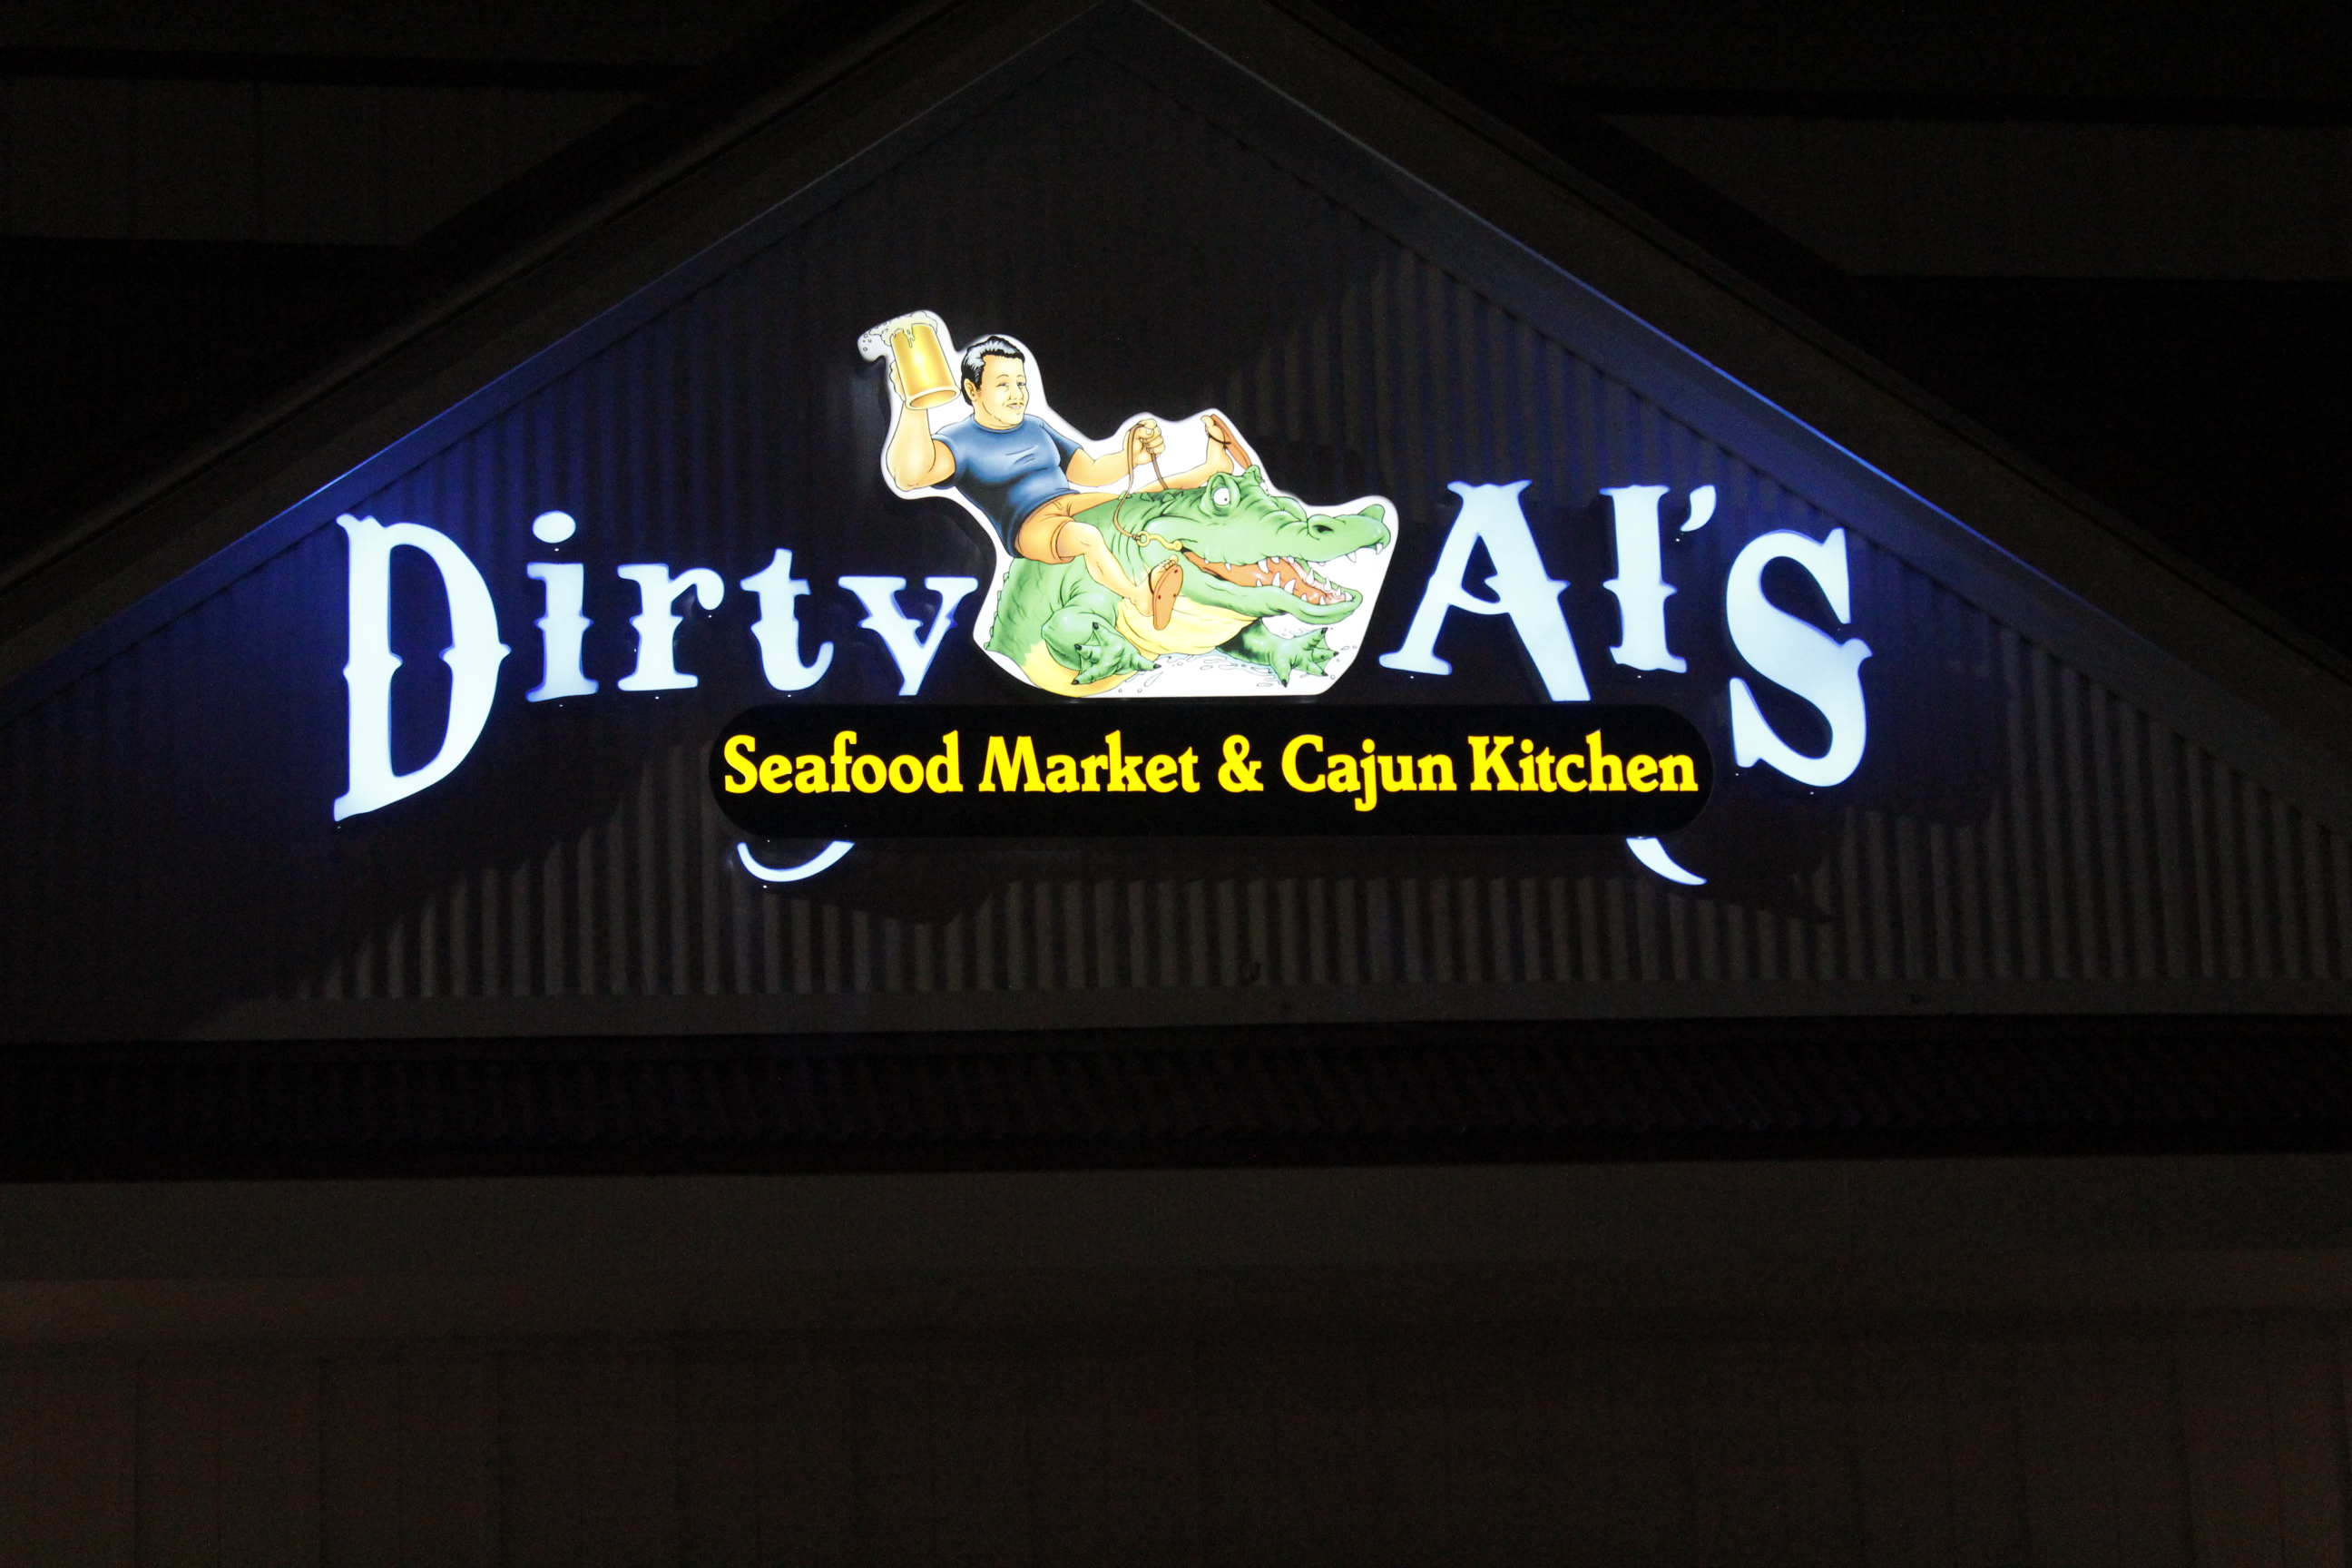 Engineered a vibrant, illuminated sign for Dirty Al's, enhancing the establishment's visibility and culinary identity.